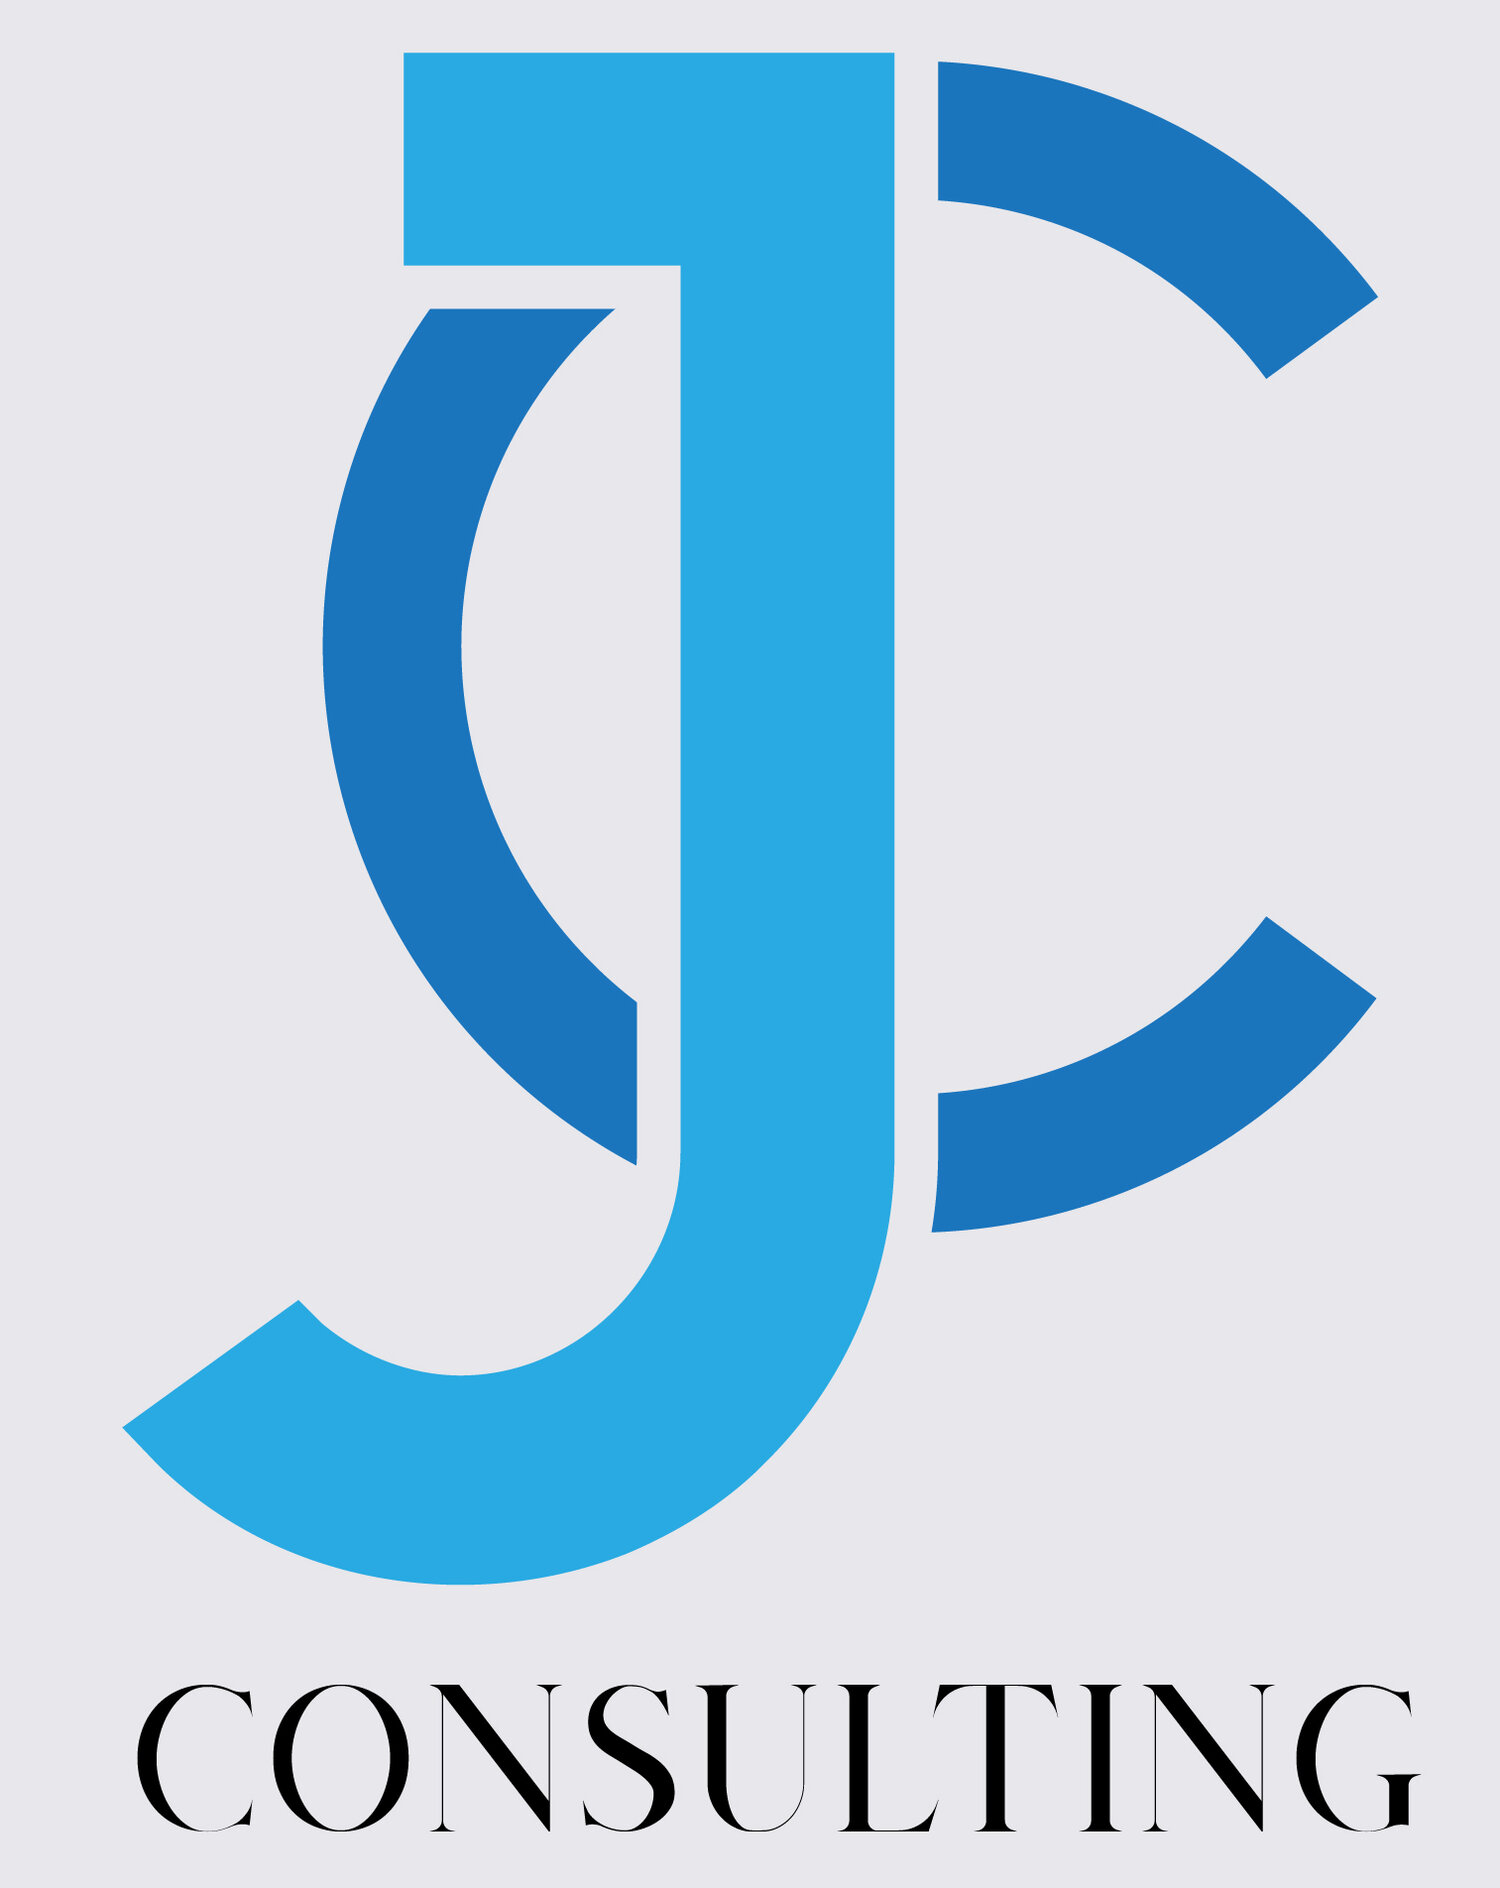 JC Consulting